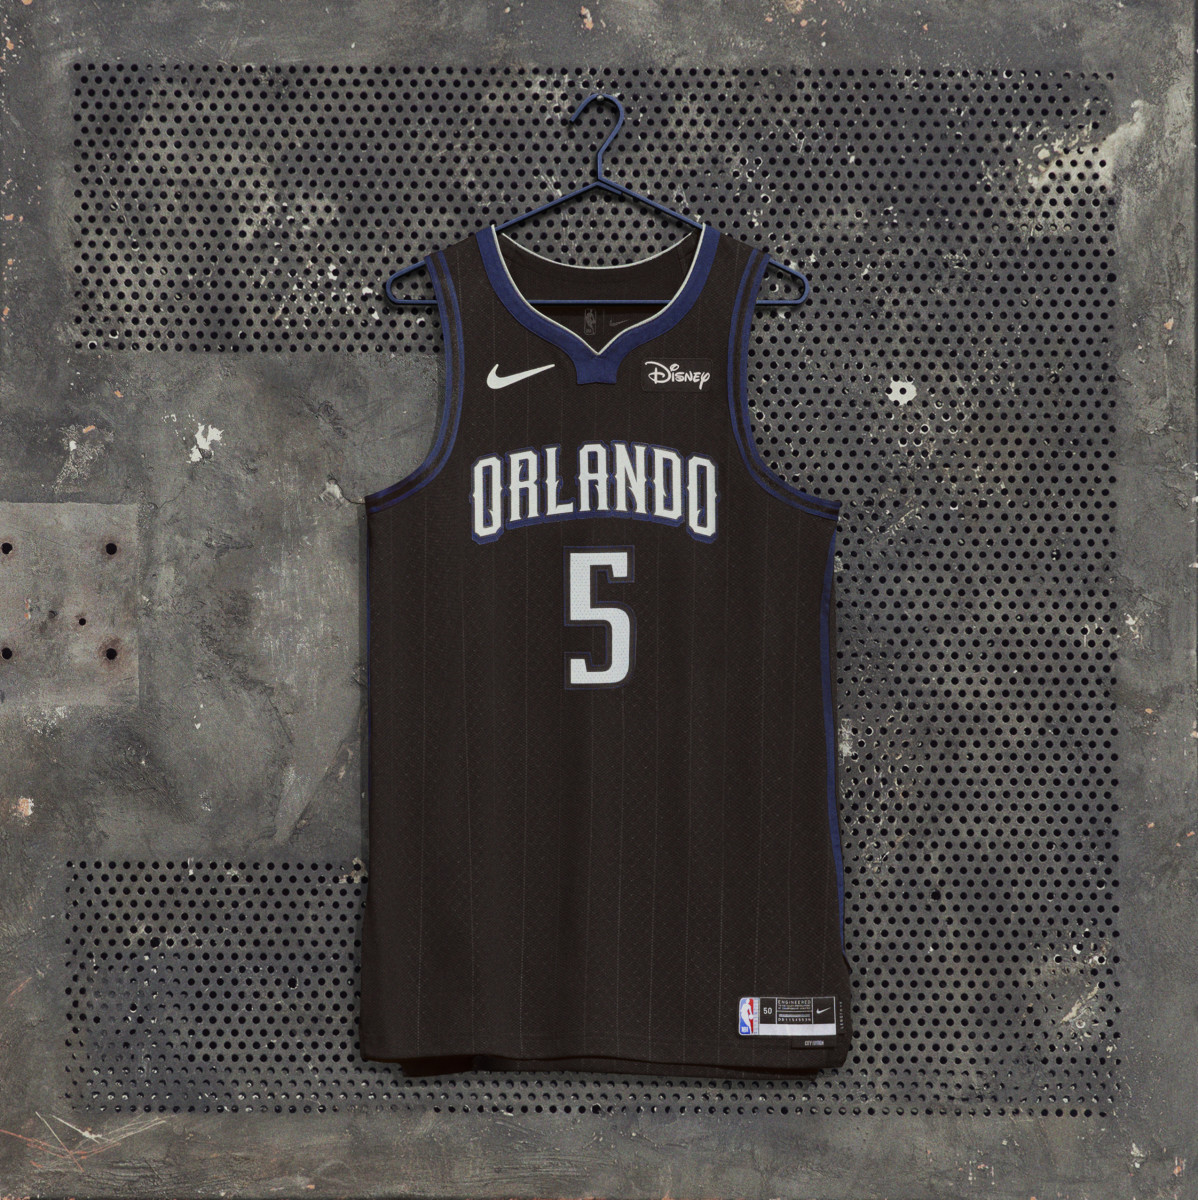 Ranking every Nike NBA City Edition jersey - Sports Illustrated